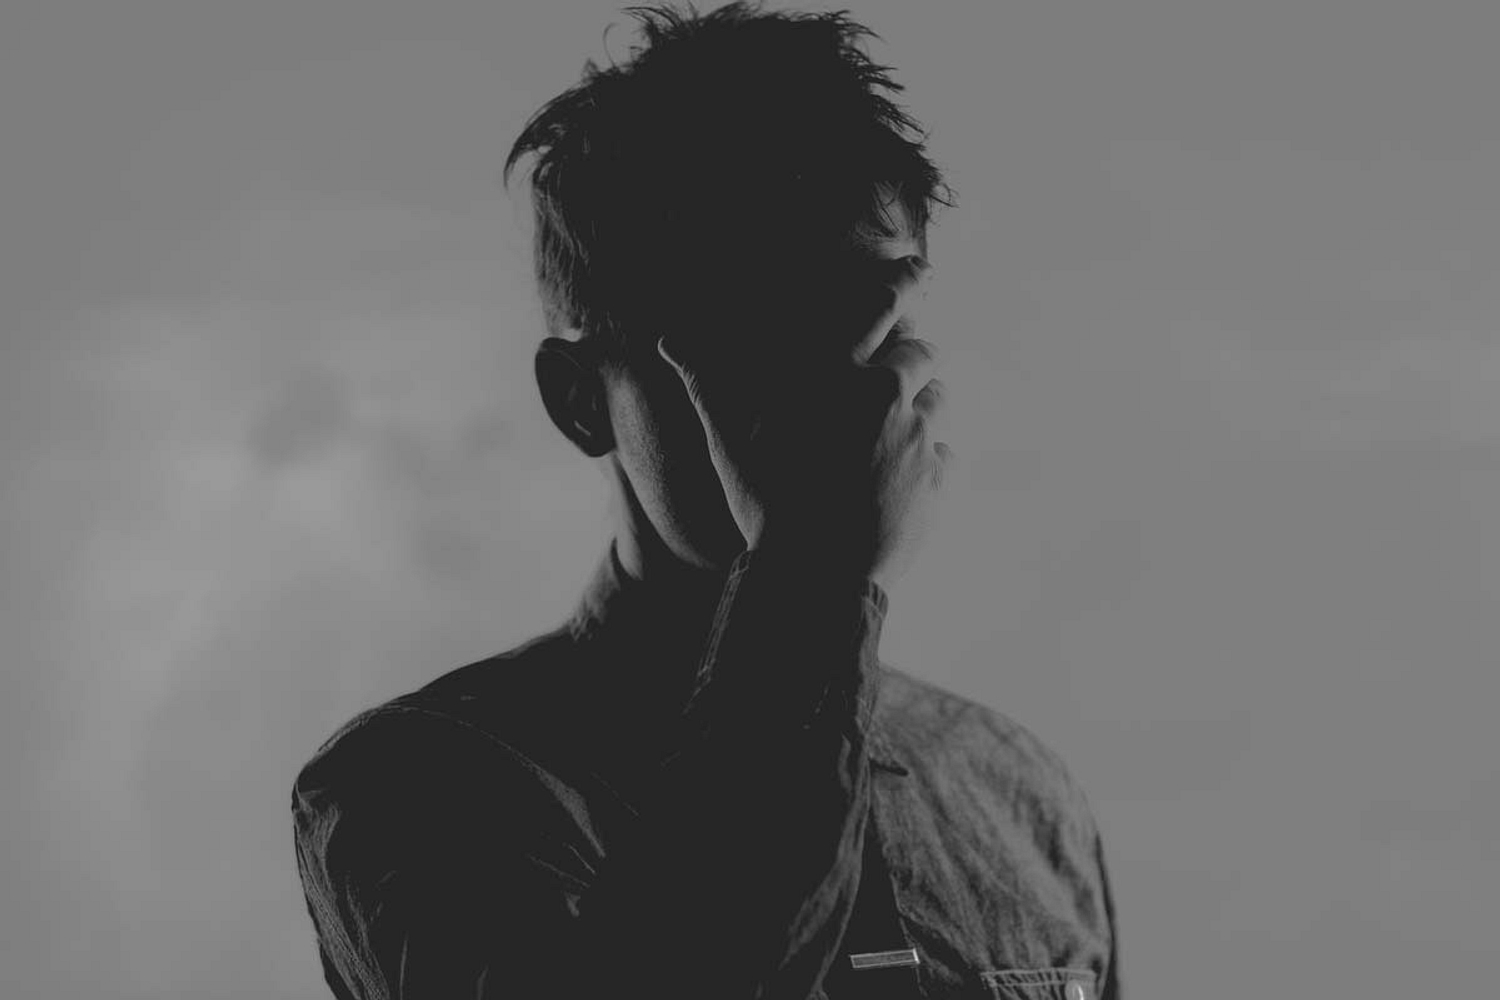 Son Lux shares new track ‘You Don’t Know Me’